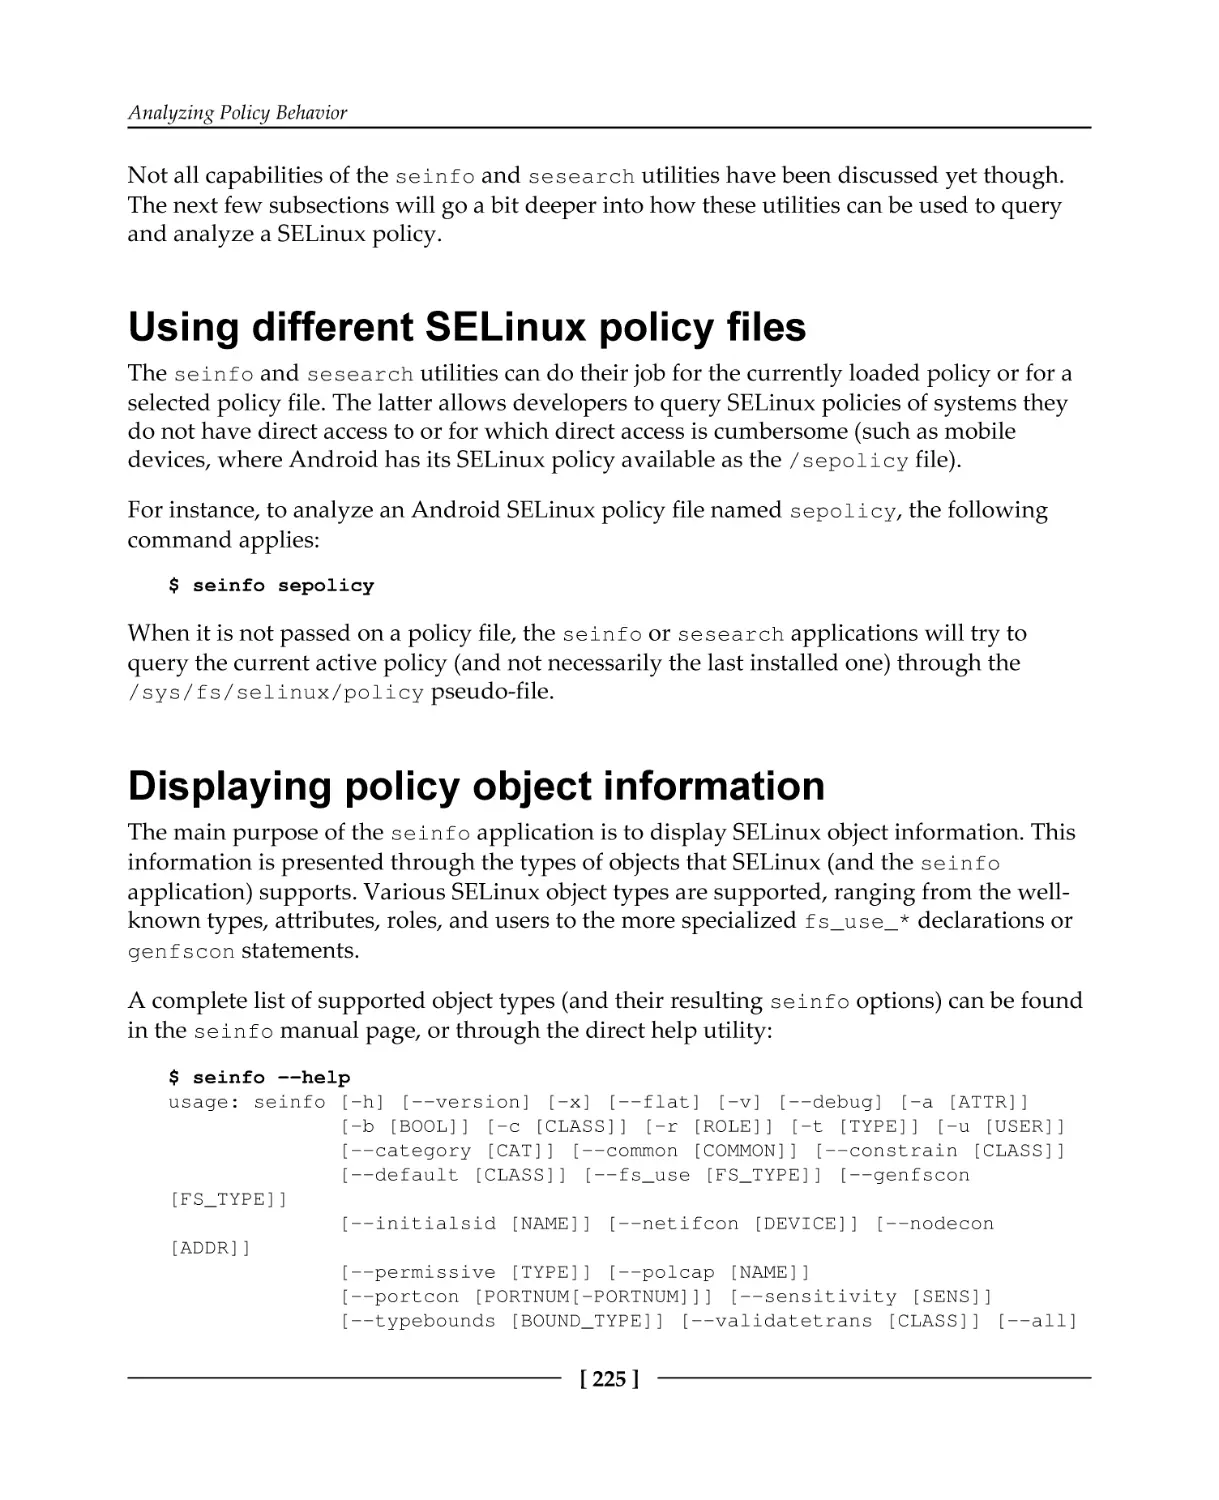 Using different SELinux policy files
Displaying policy object information